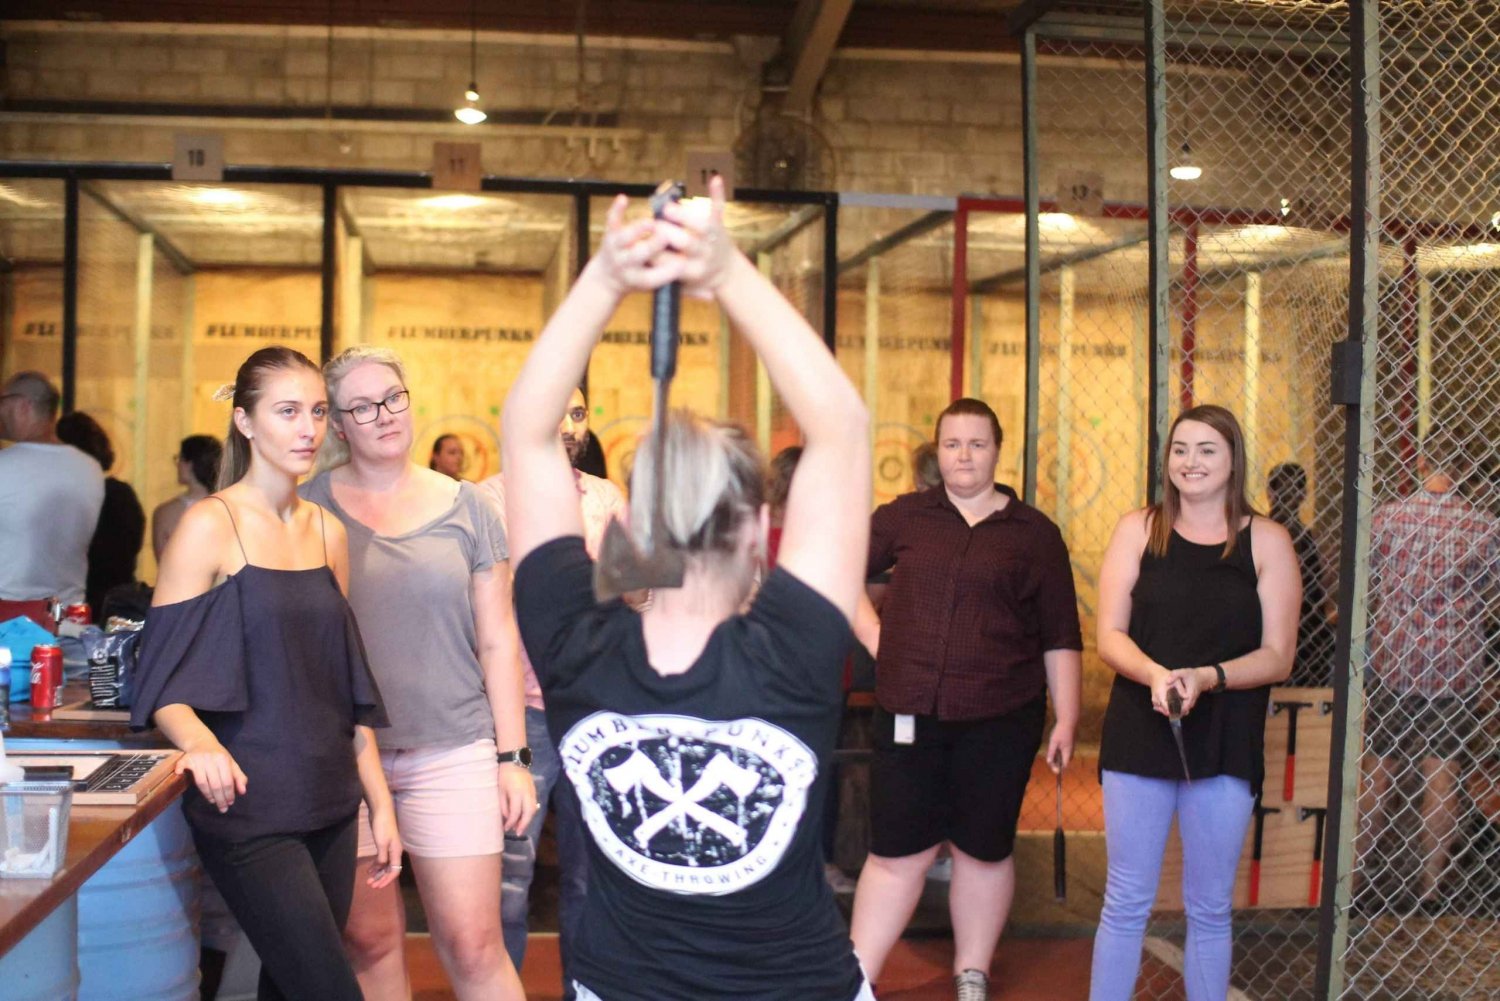 Sydney: Lumber Punks Axe Throwing Experience